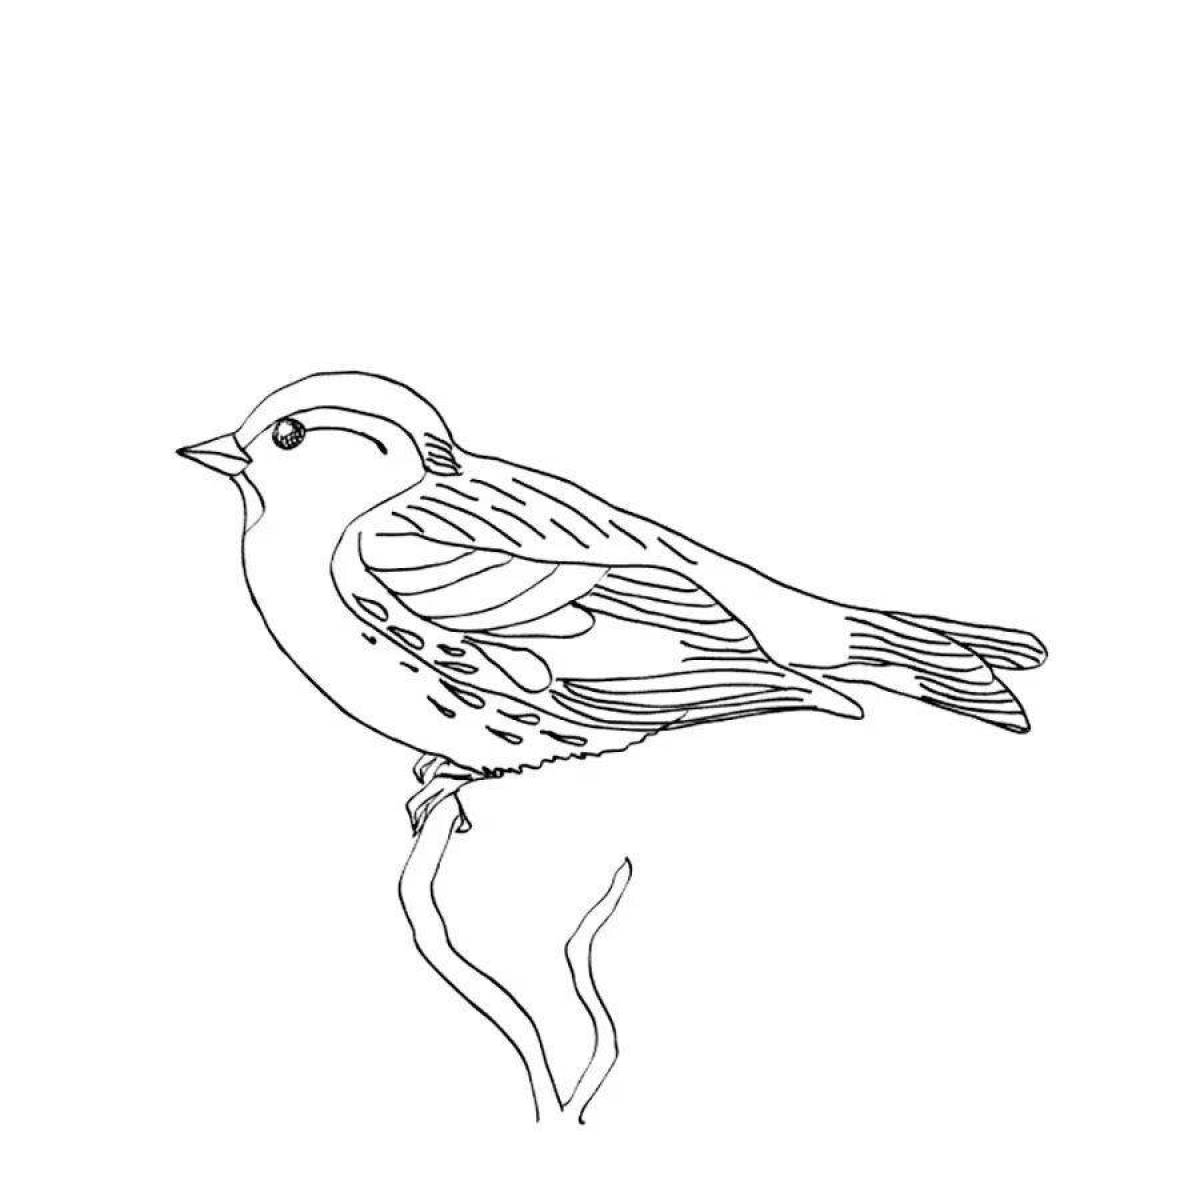 Sparkly siskin coloring page for beginners